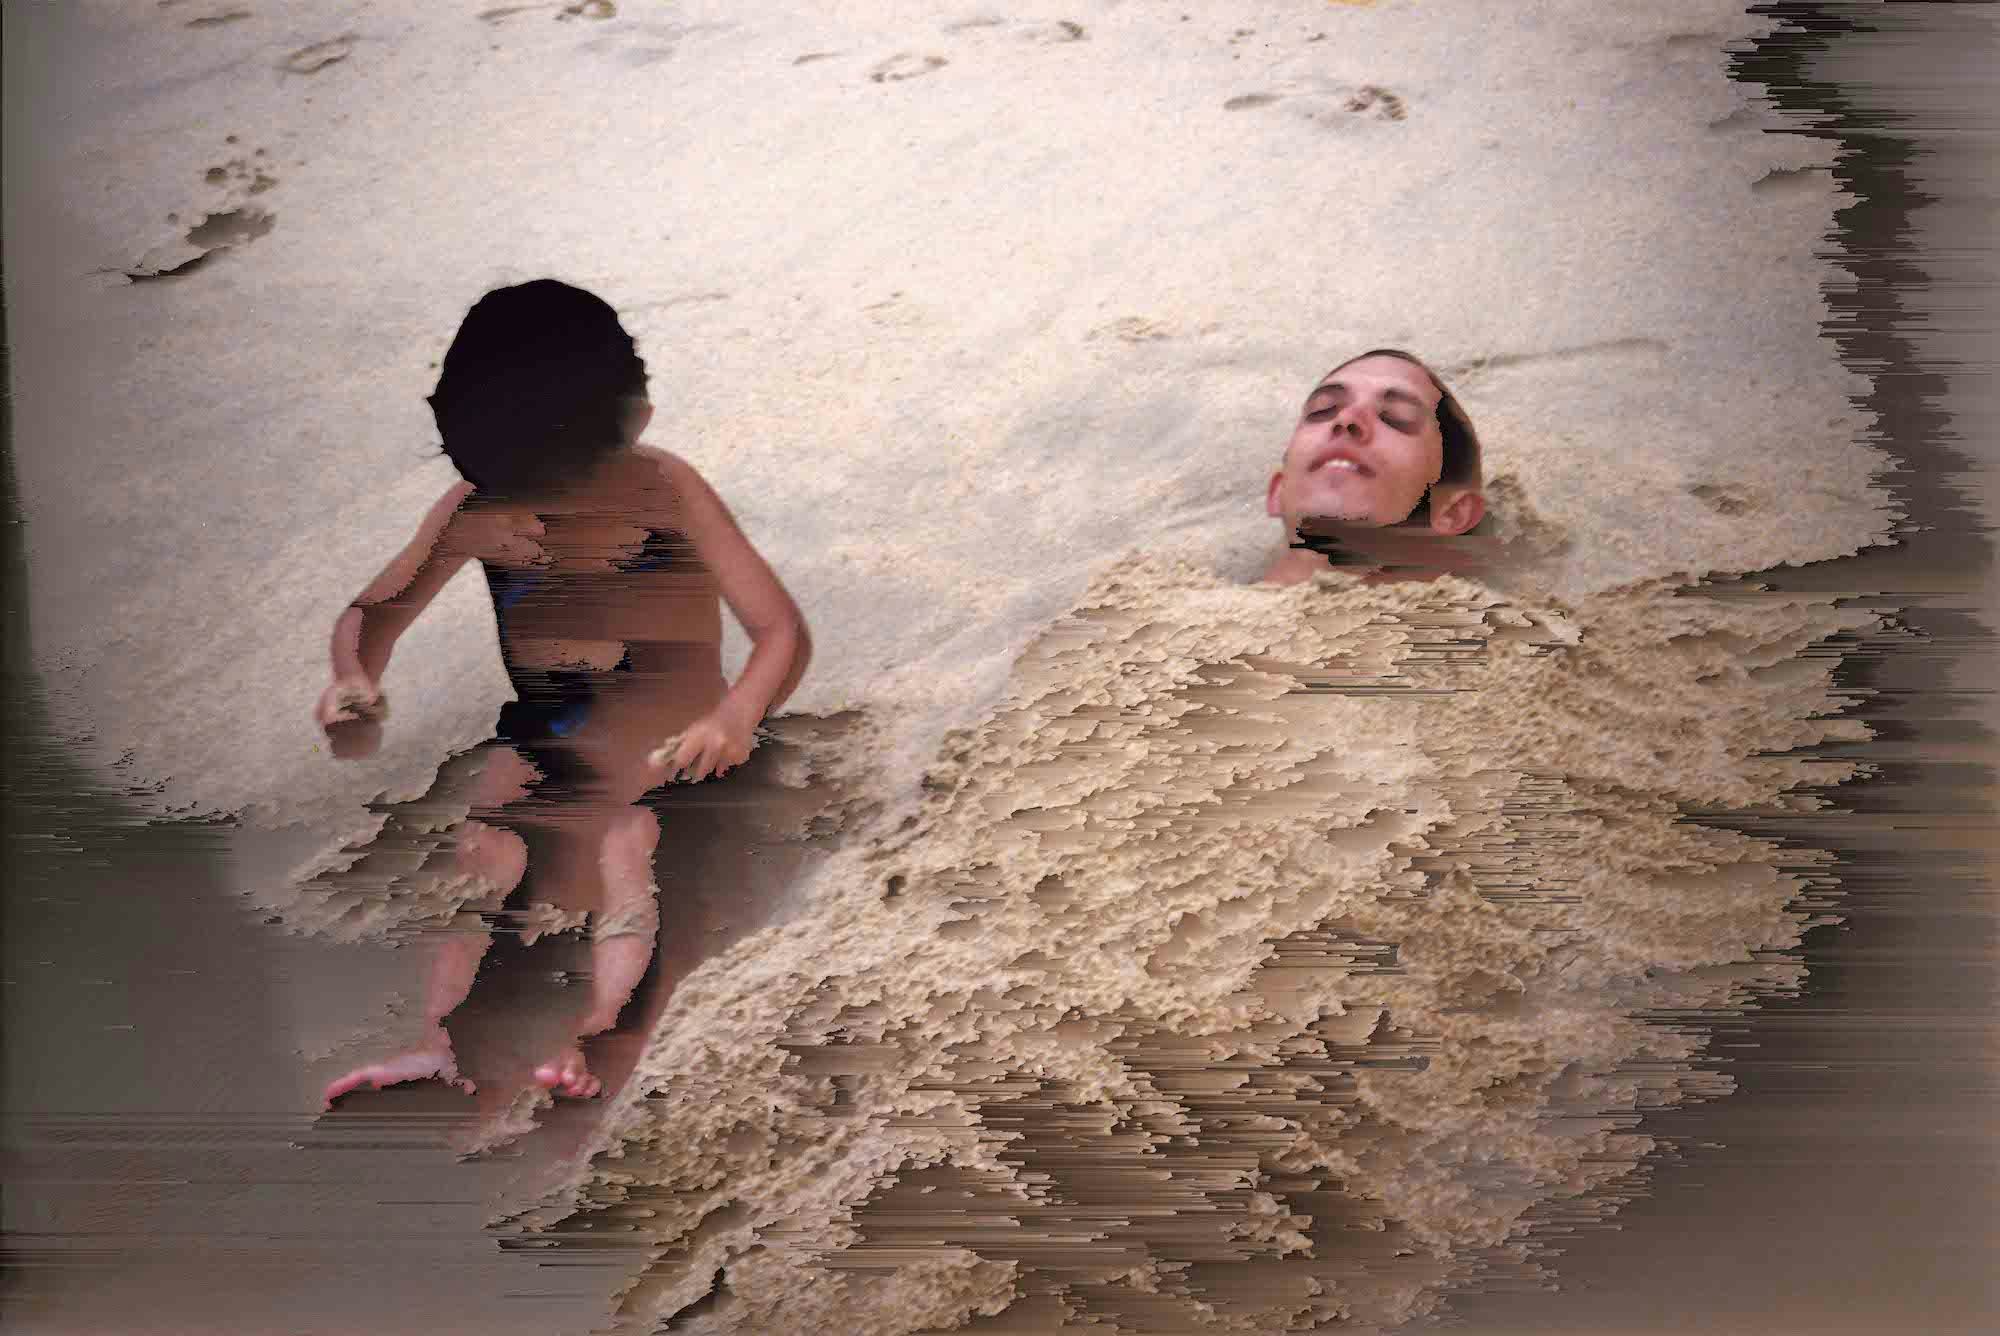 Archival picture of the artist as a small child, sitting besides his father on the beach. The pixels in the photo are manipulated, blurring the image. © Cristóbal Ascencio Ramos